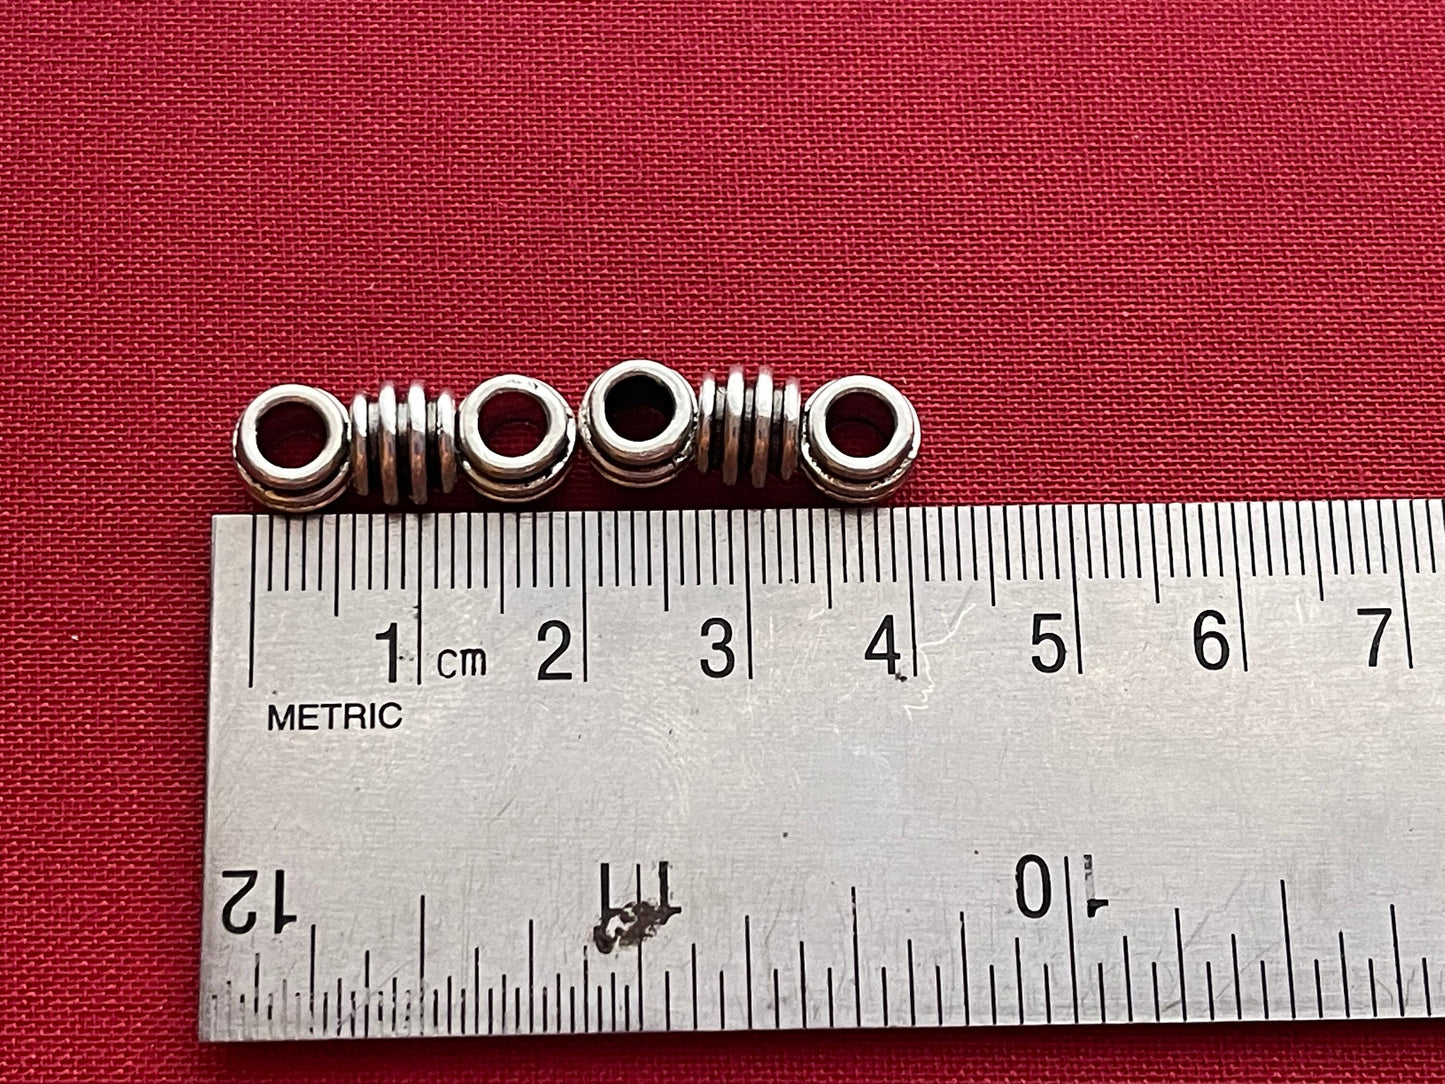 Bali Beads chunky, grooved bee barrel design (lot of 12 or 36) Premium quality large hole striped spacer bead in antique silver